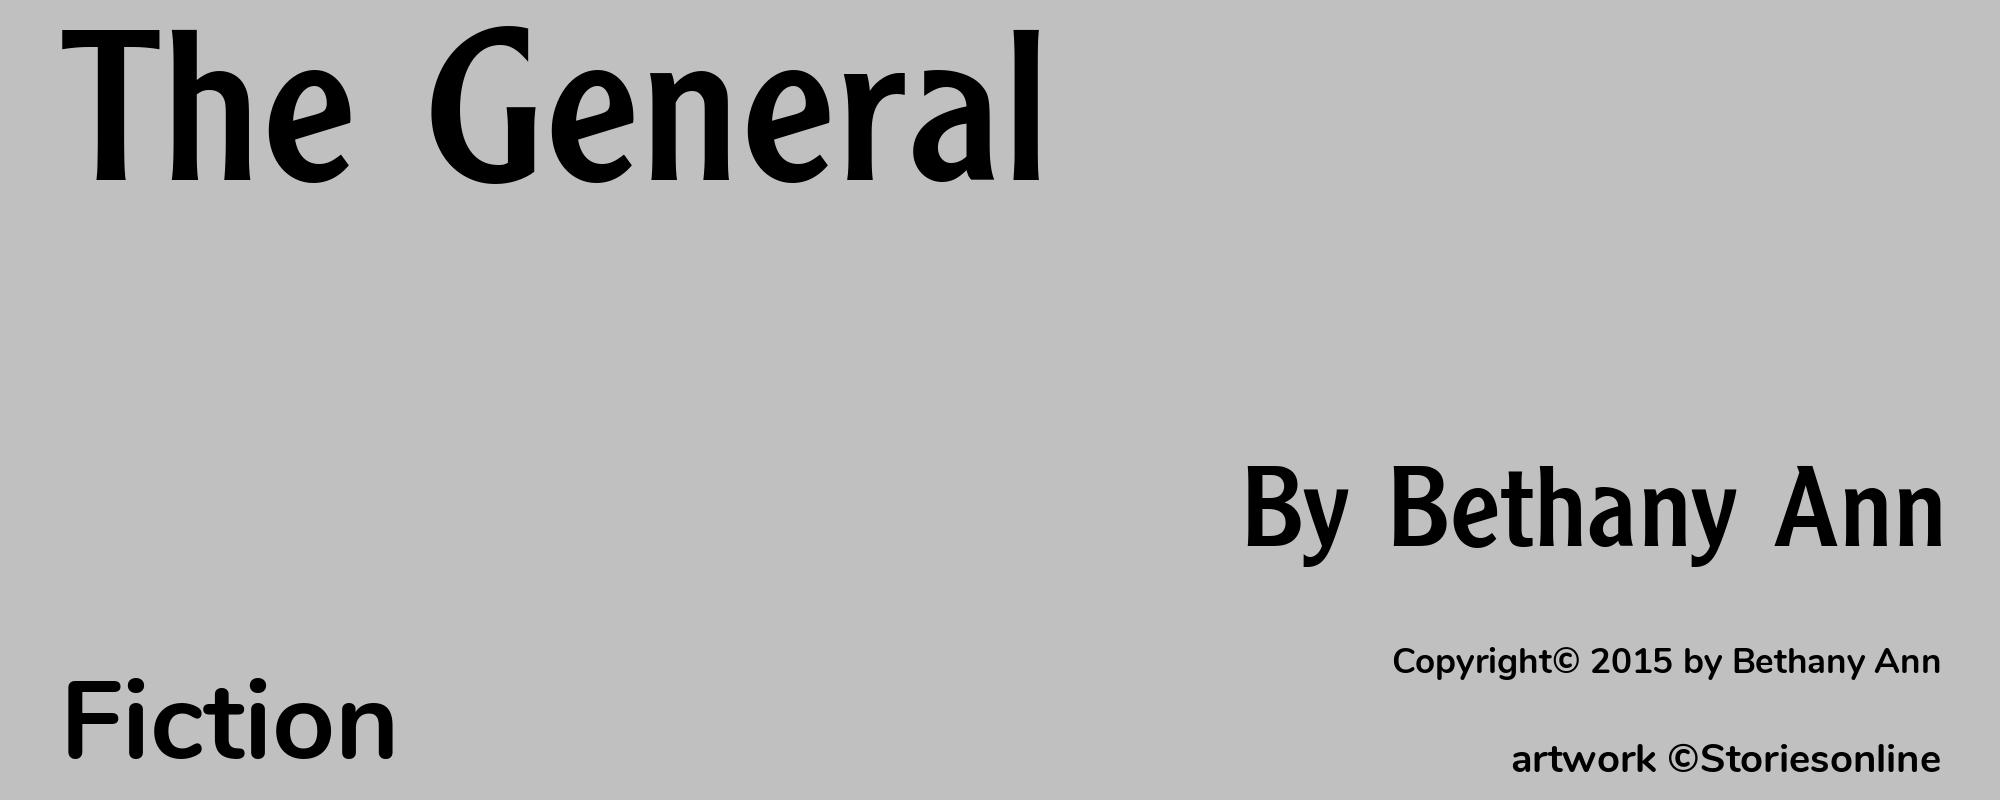 The General - Cover